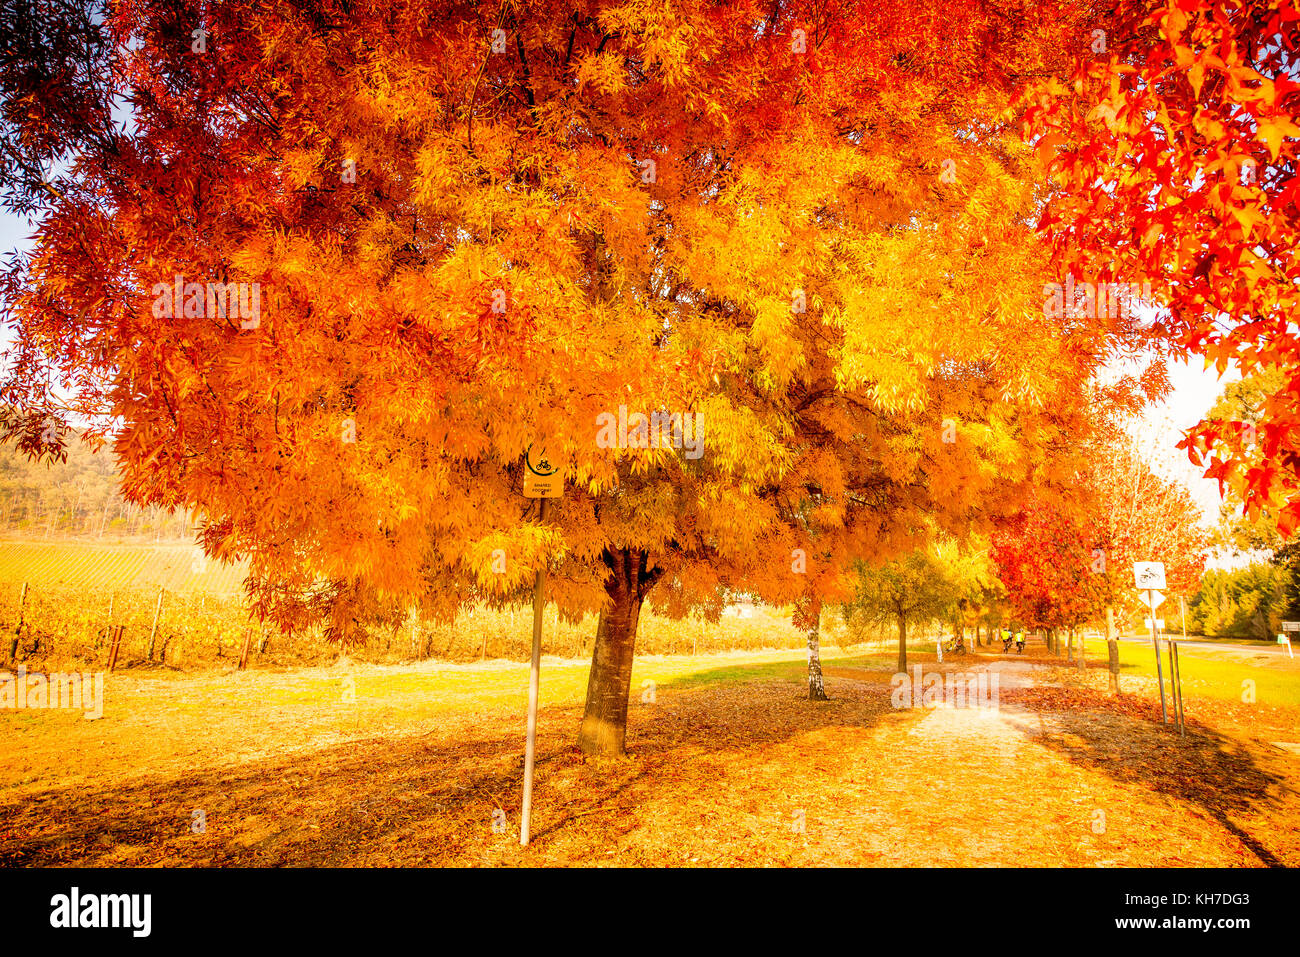 Autumn trees in Australia changing into beautiful orange, yellow and red. Stock Photo